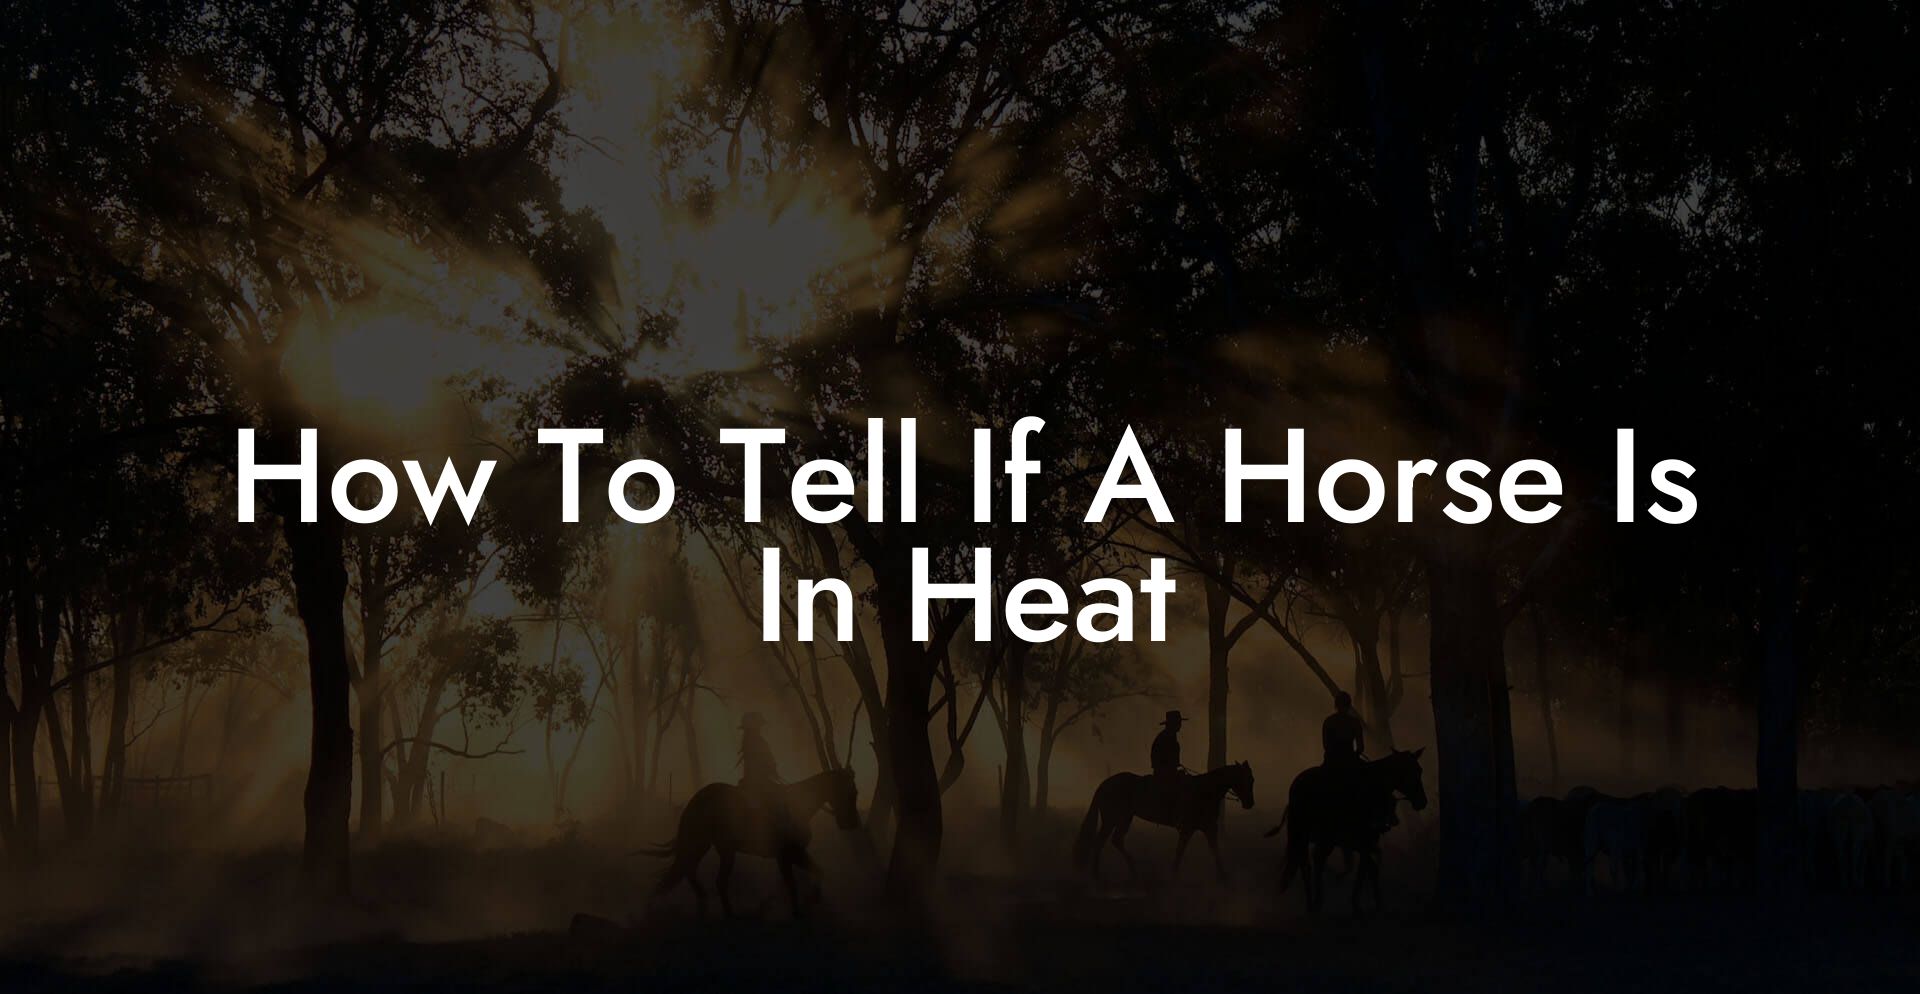 How To Tell If A Horse Is In Heat